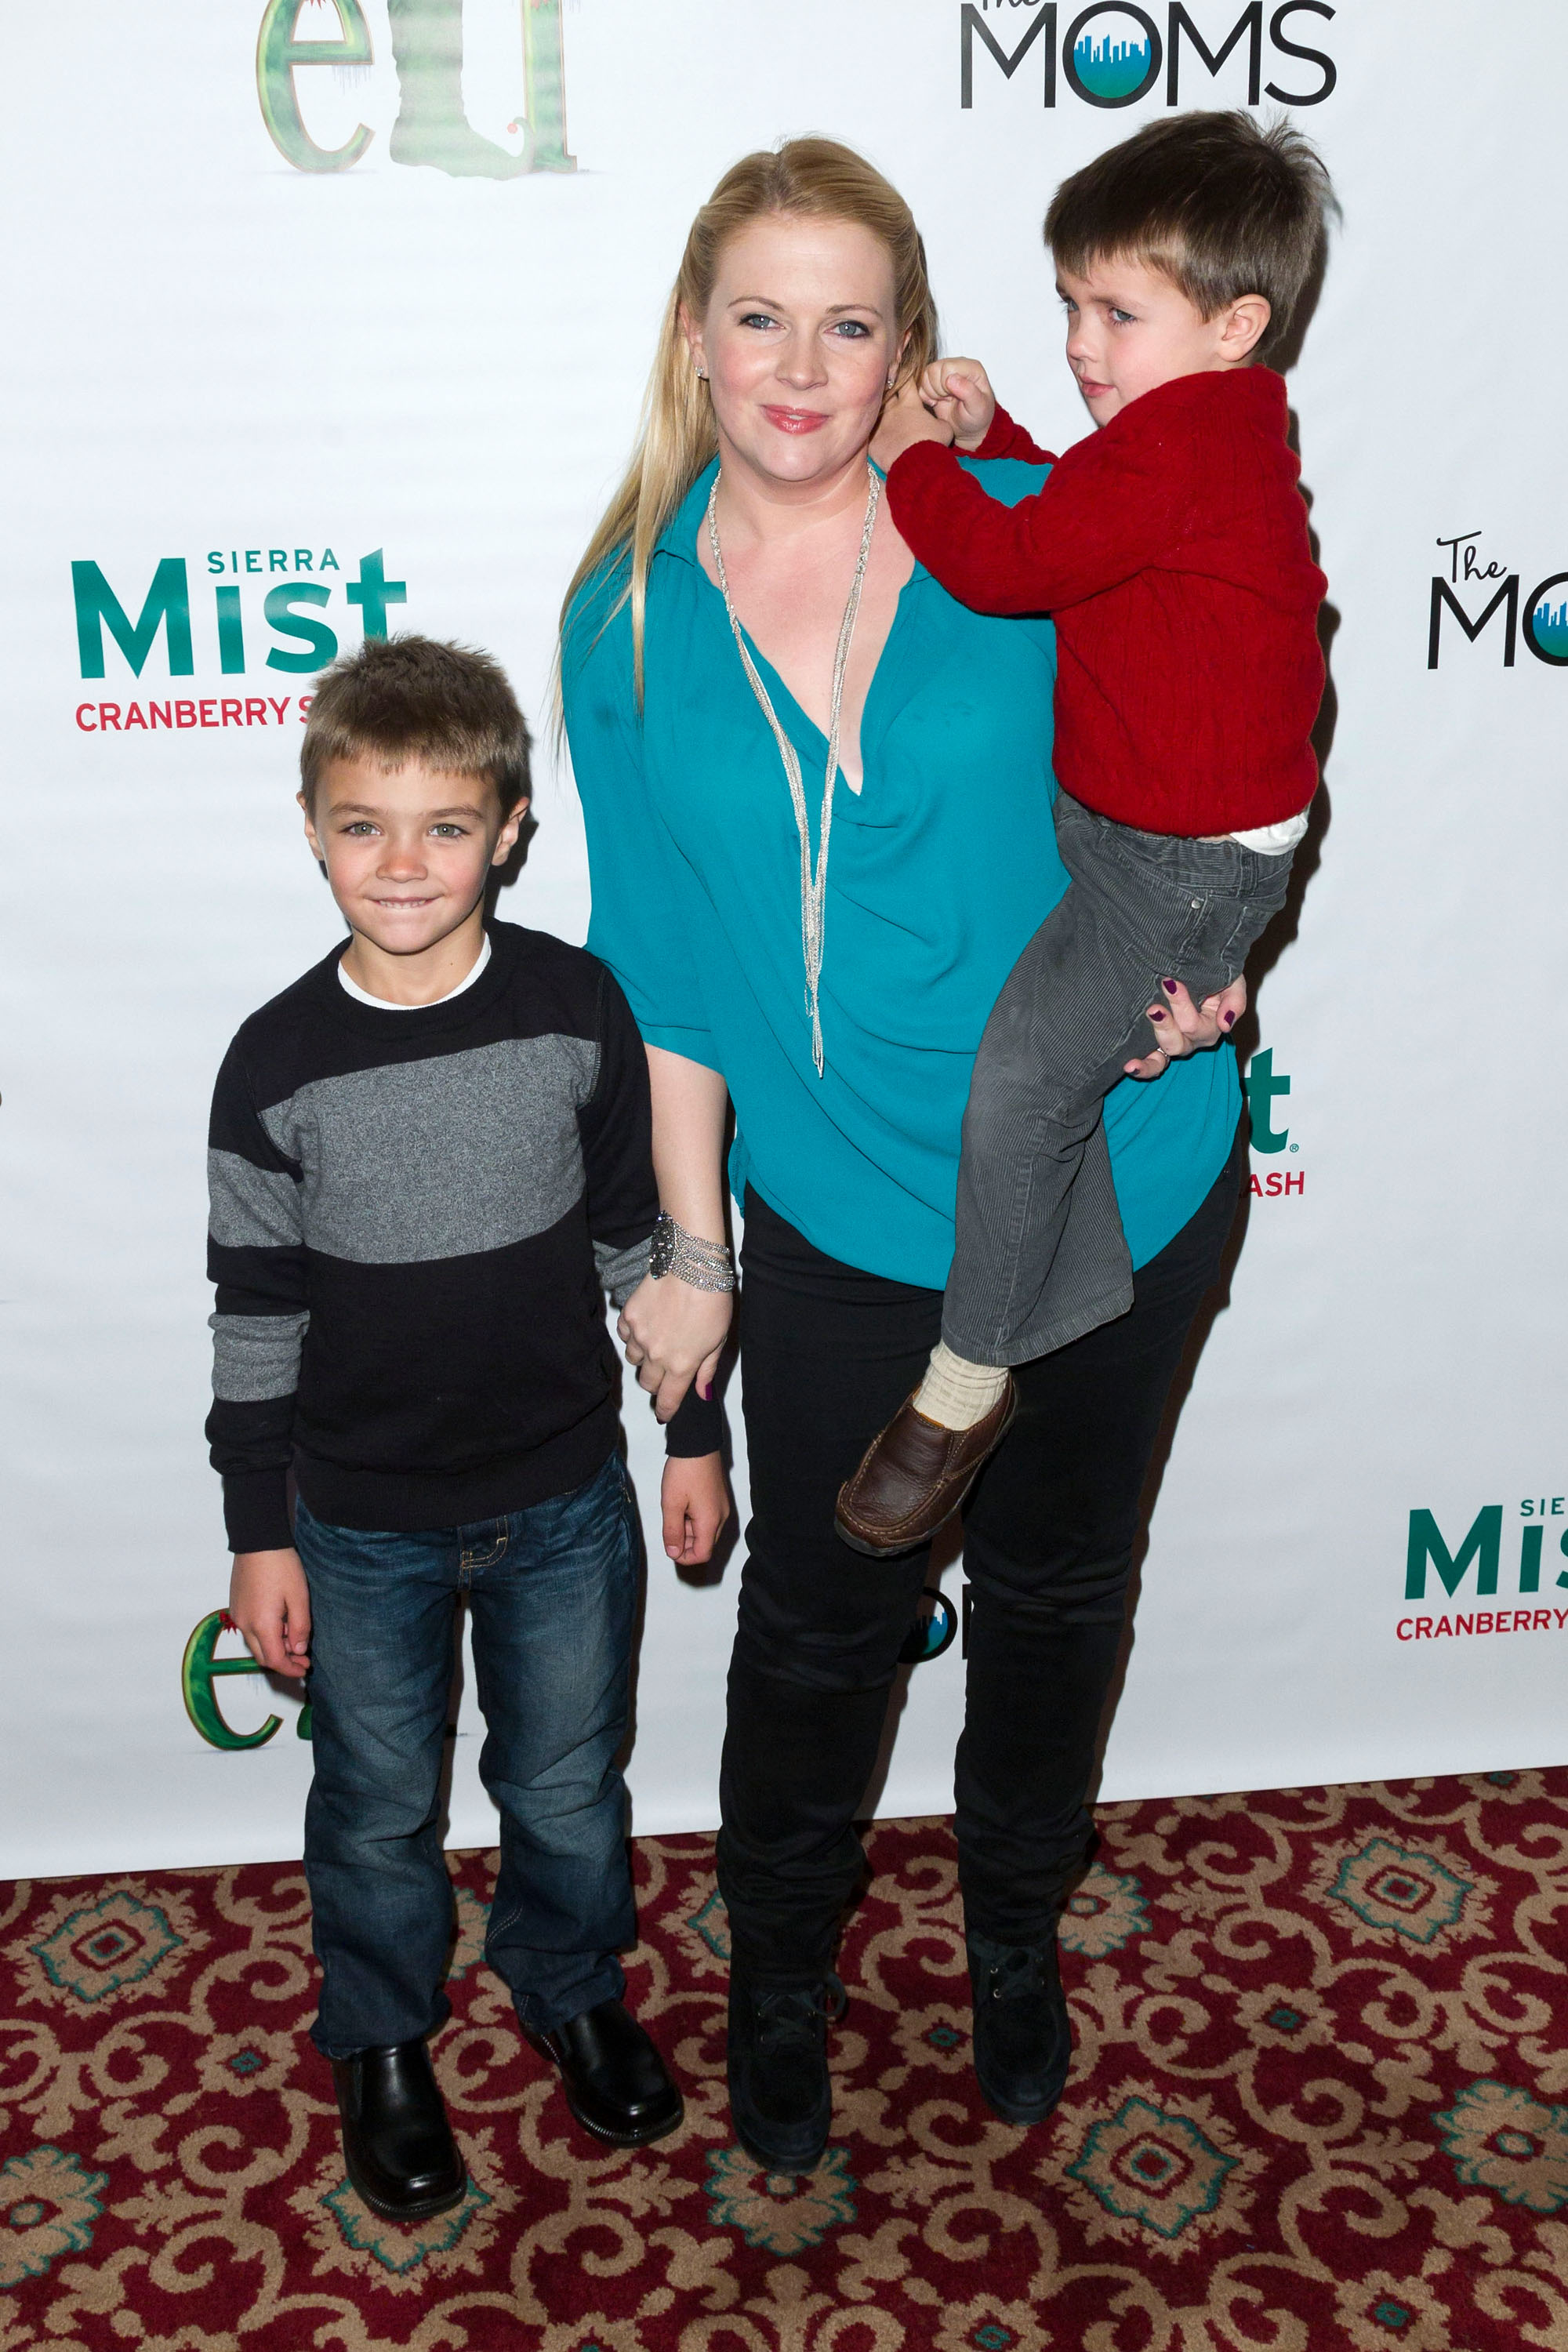 Mason, Melissa Joan Hart, and Braydon attend "Elf The Musical" Holiday Christmas Party Hosted By The Moms in New York City, on November 13, 2012. | Source: Getty Images